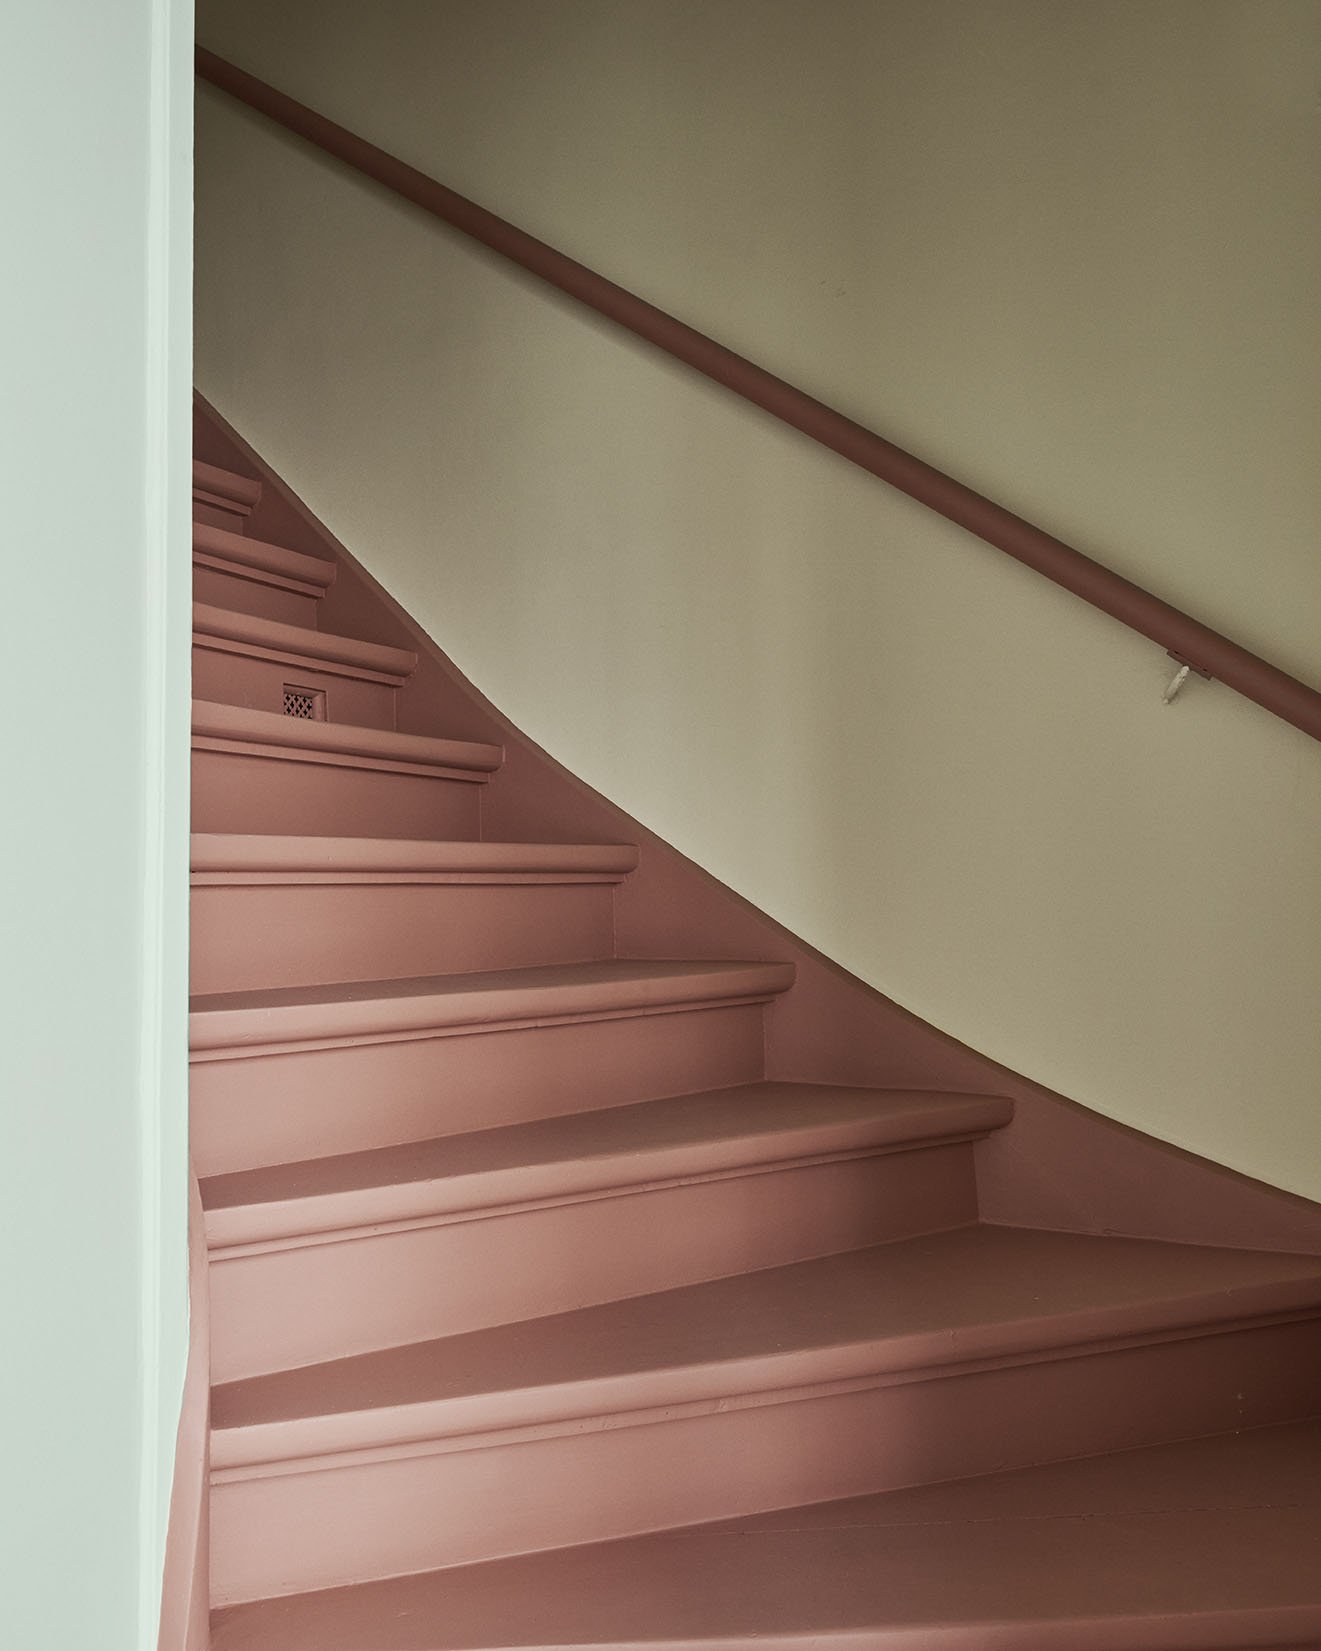 Stairs painted with 'Yellow And Rose'